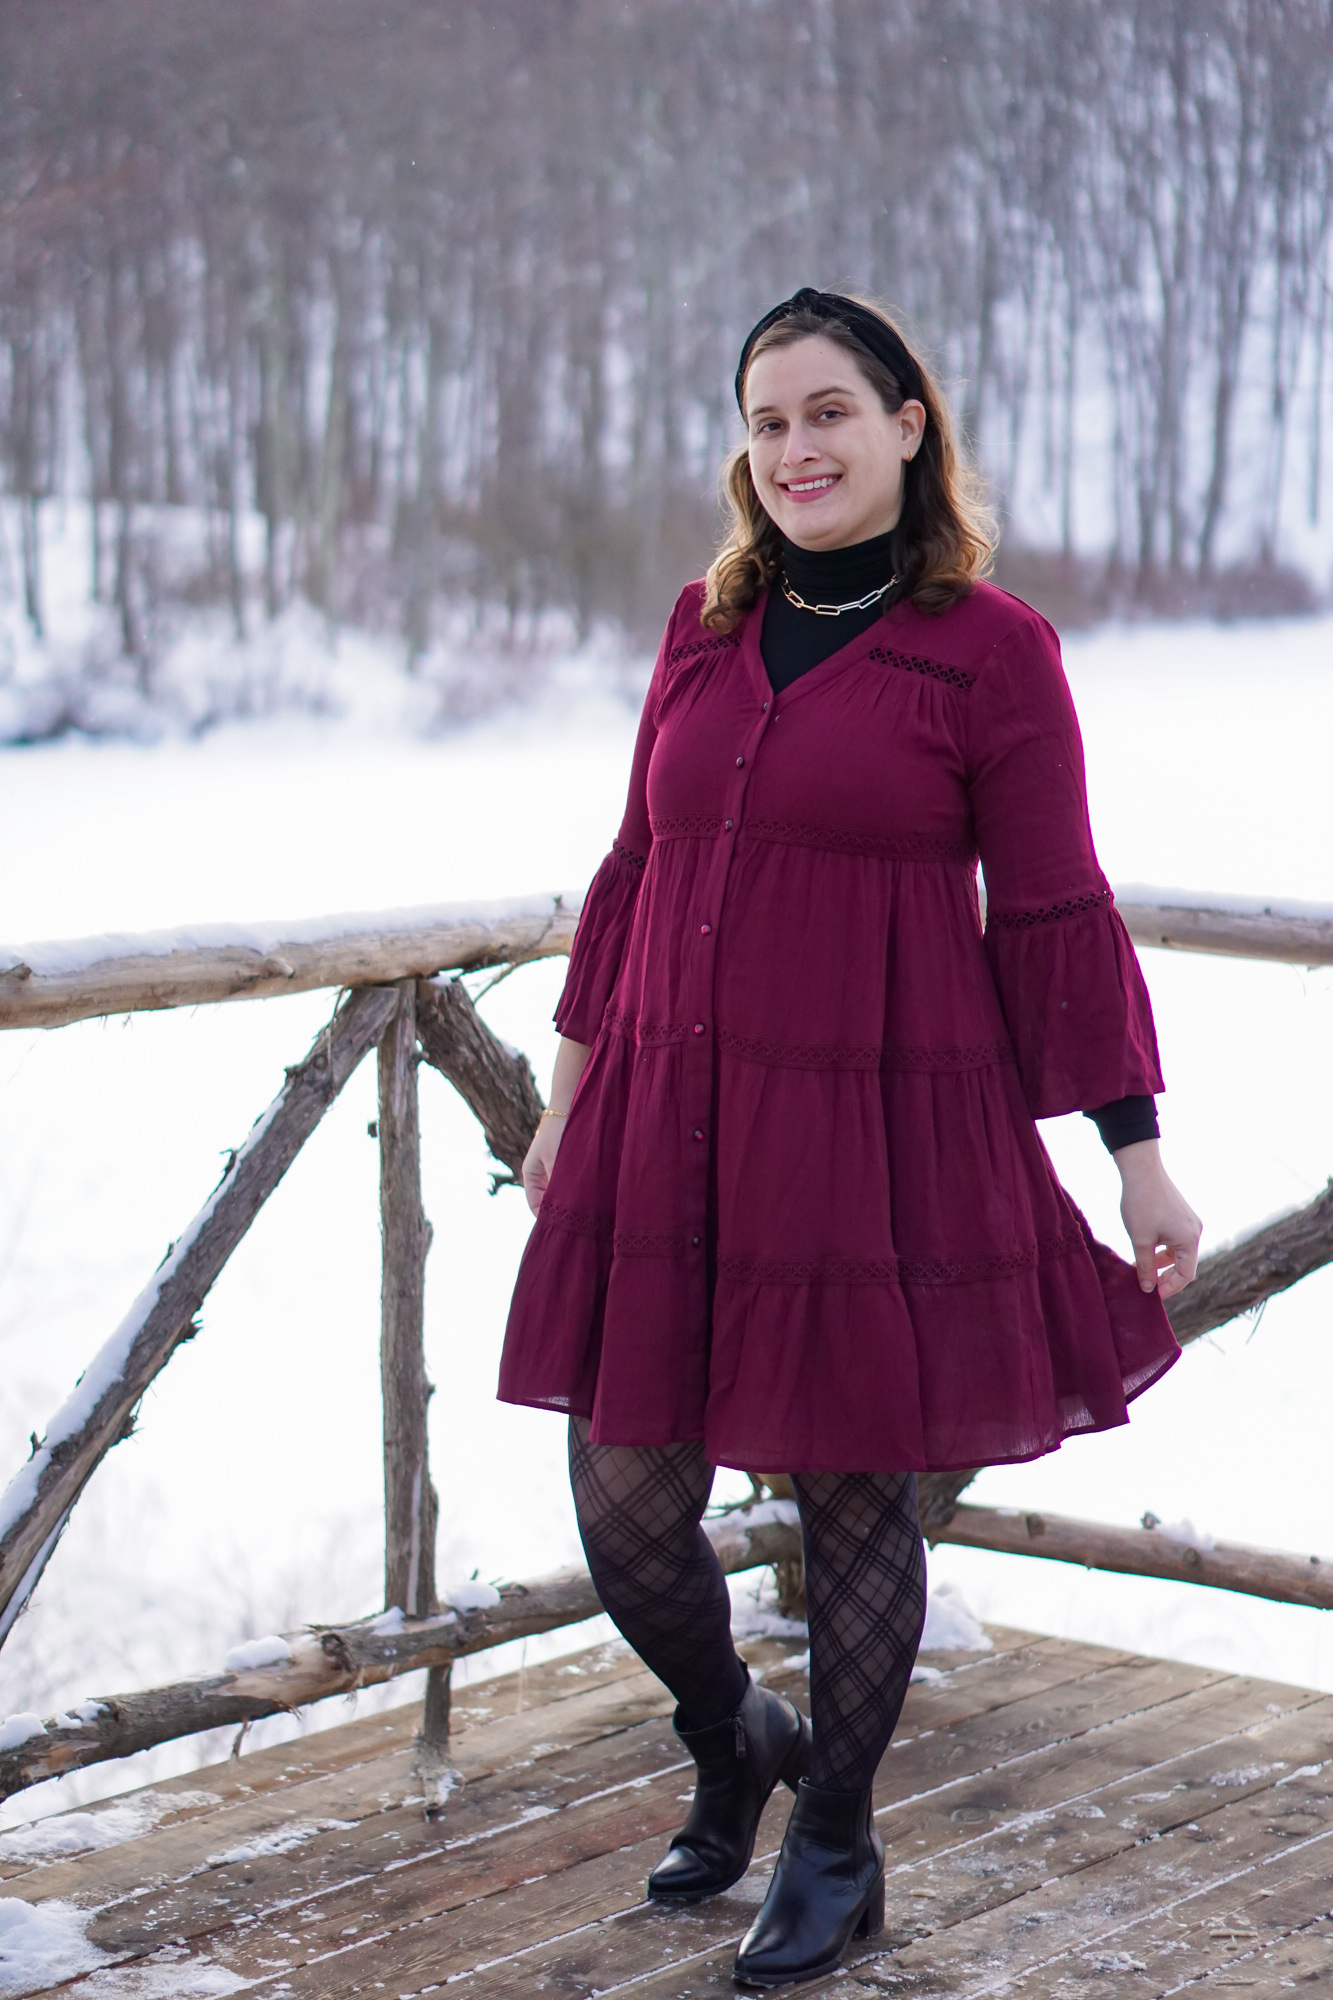 How to style a short dress for winter